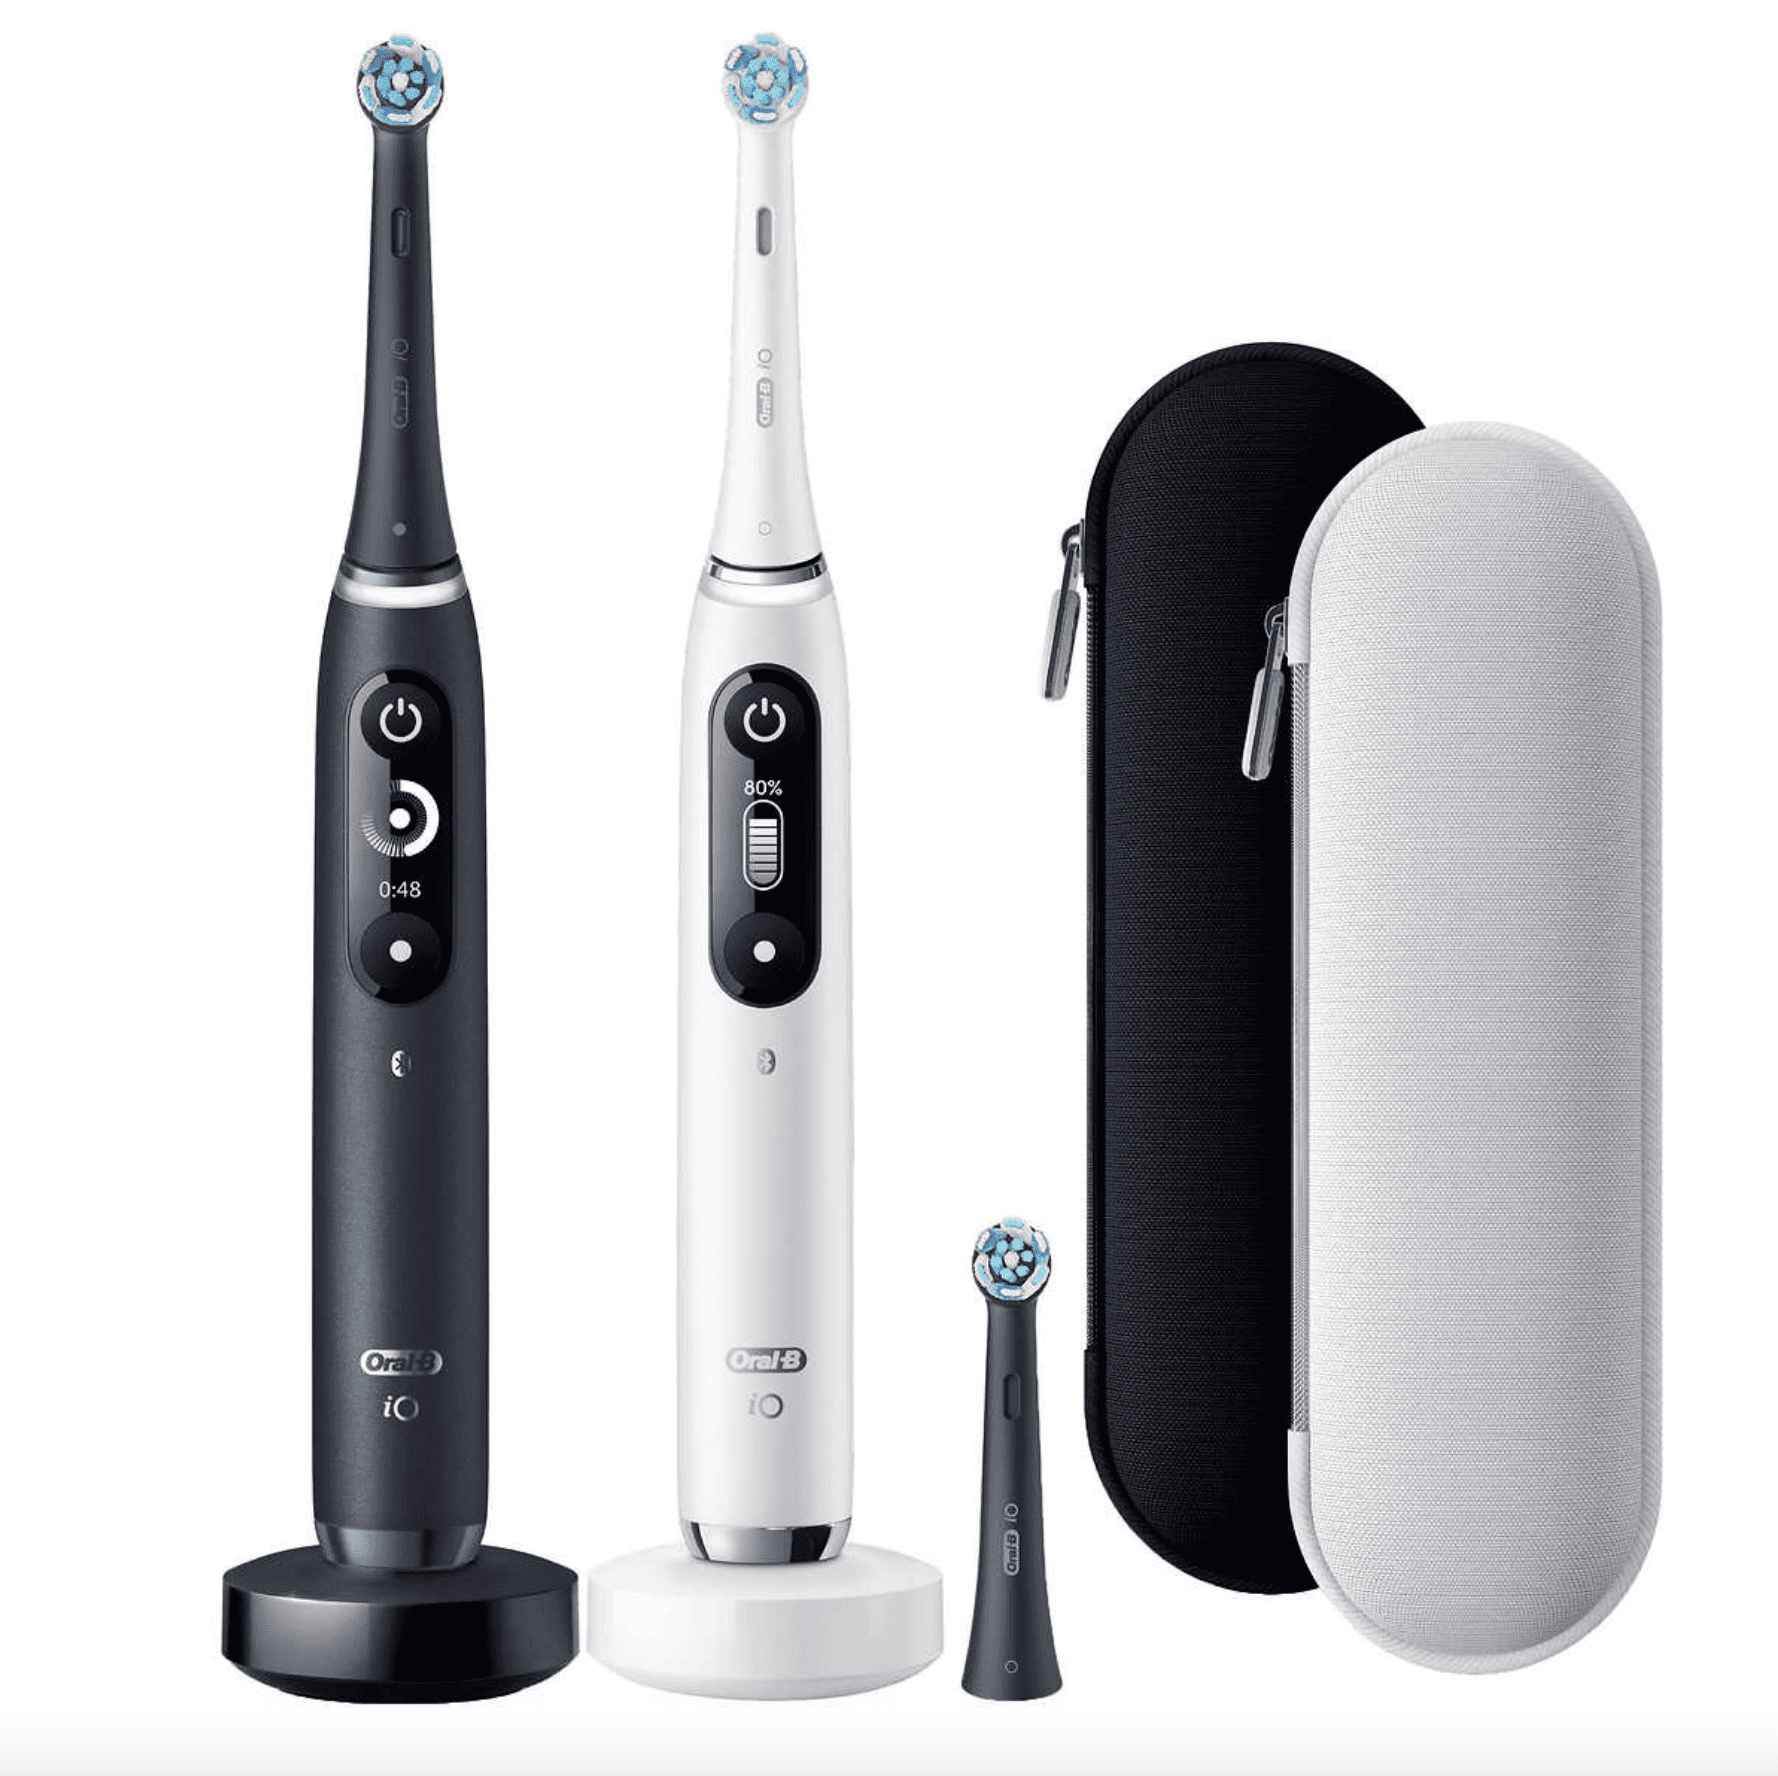 oral-b-io-series-7c-rechargeable-toothbrush-2-pack-walmart